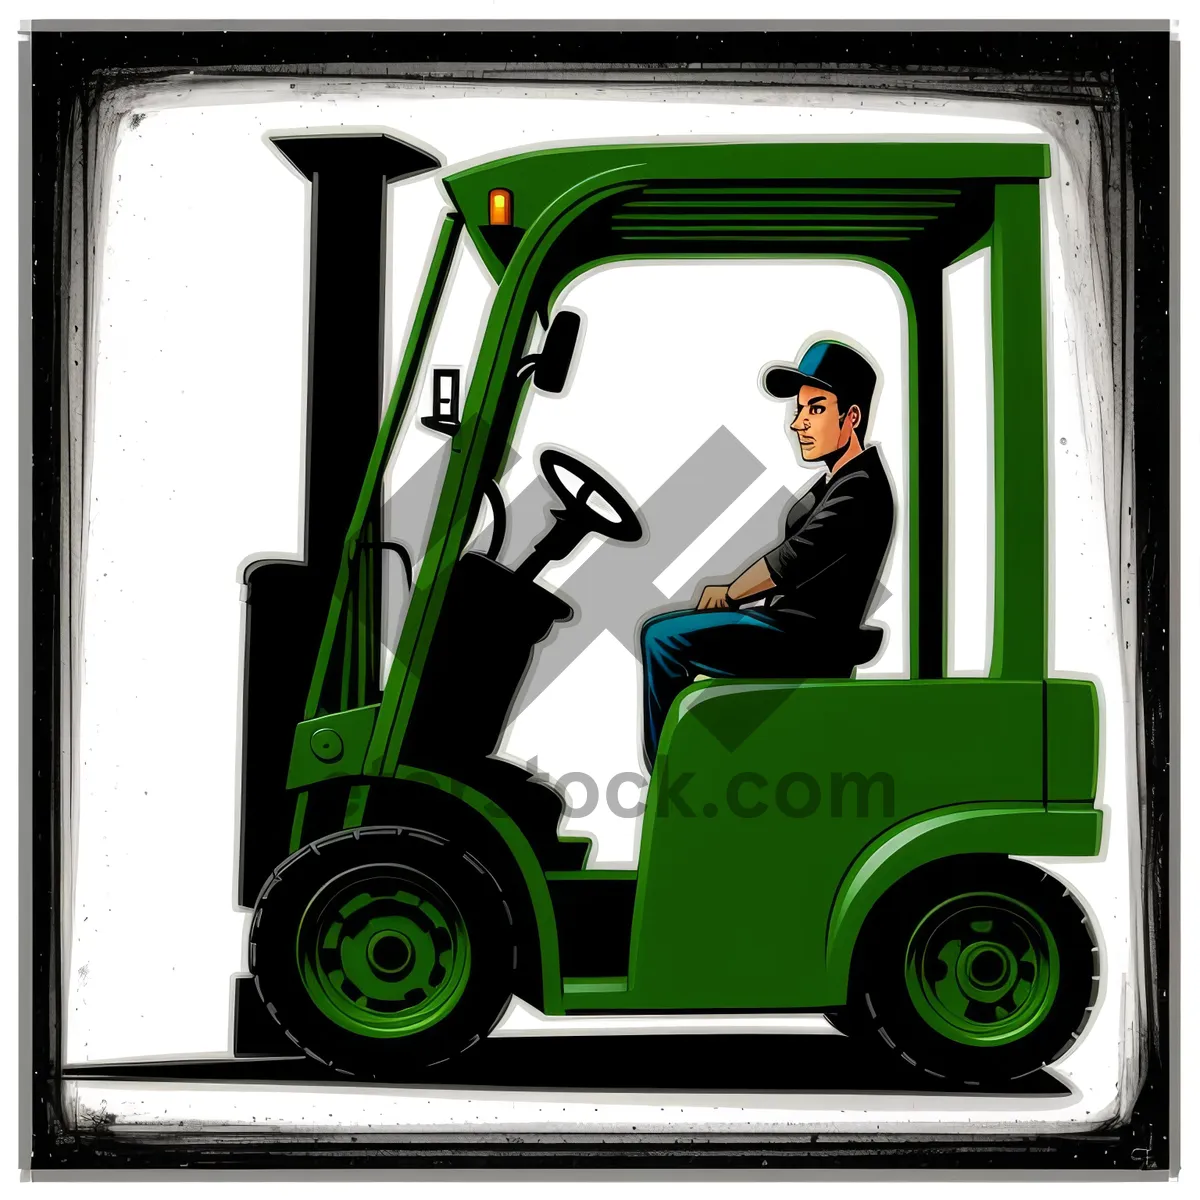 Picture of Transportation Equipment for Cargo Delivery - Truck & Forklift